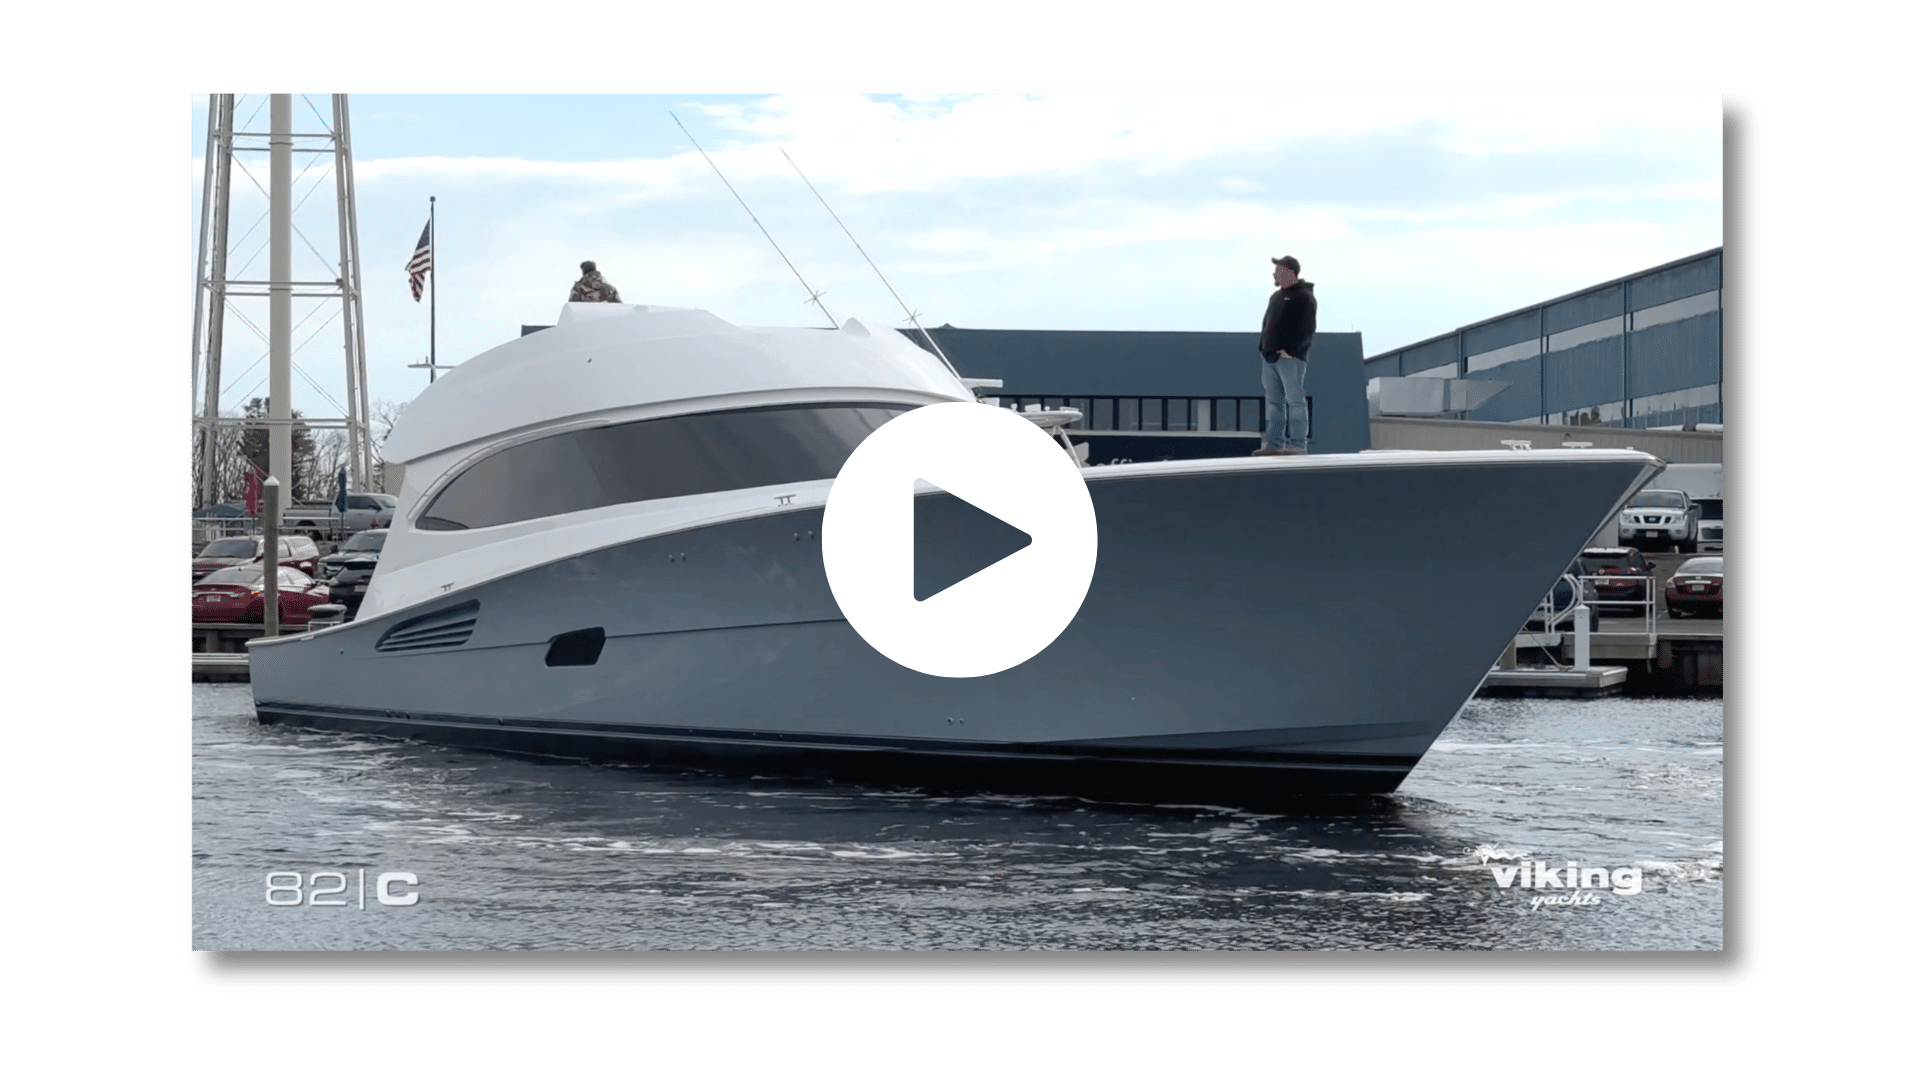 Viking Yachts Celebrates 60th Anniversary by Introducing the 82 Convertible